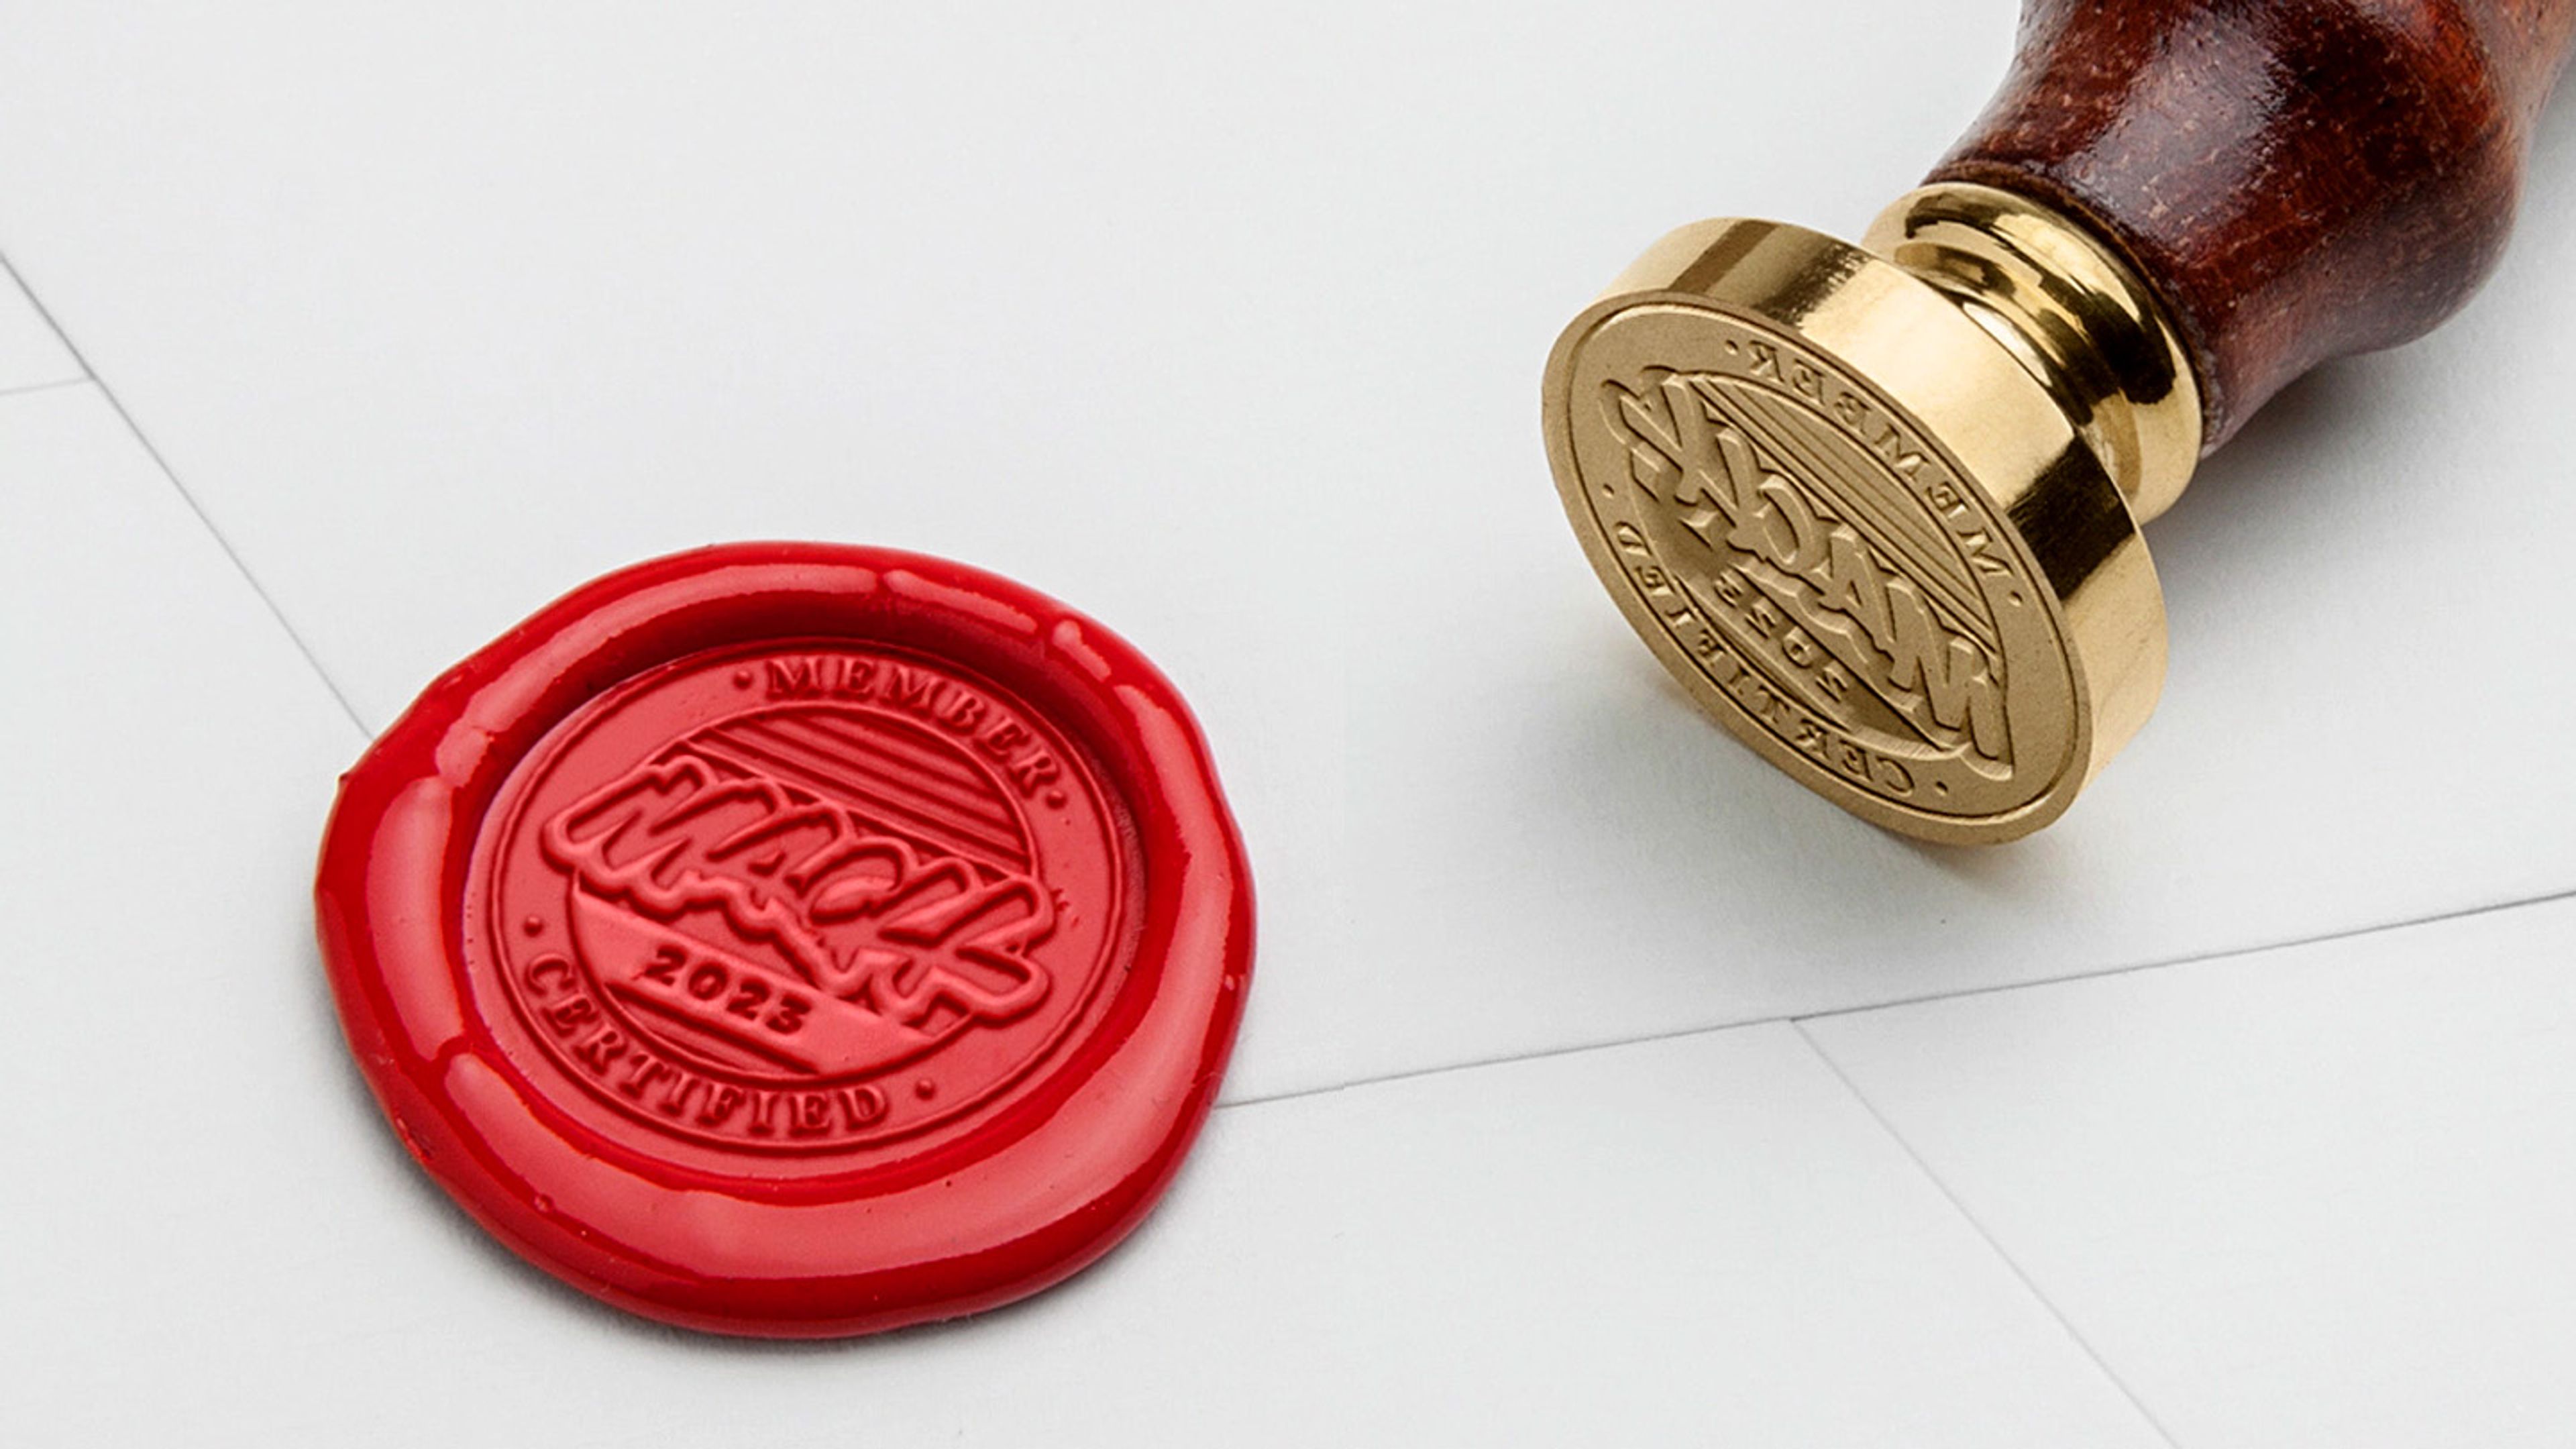 Image of MACH Alliance seal with wax imprint